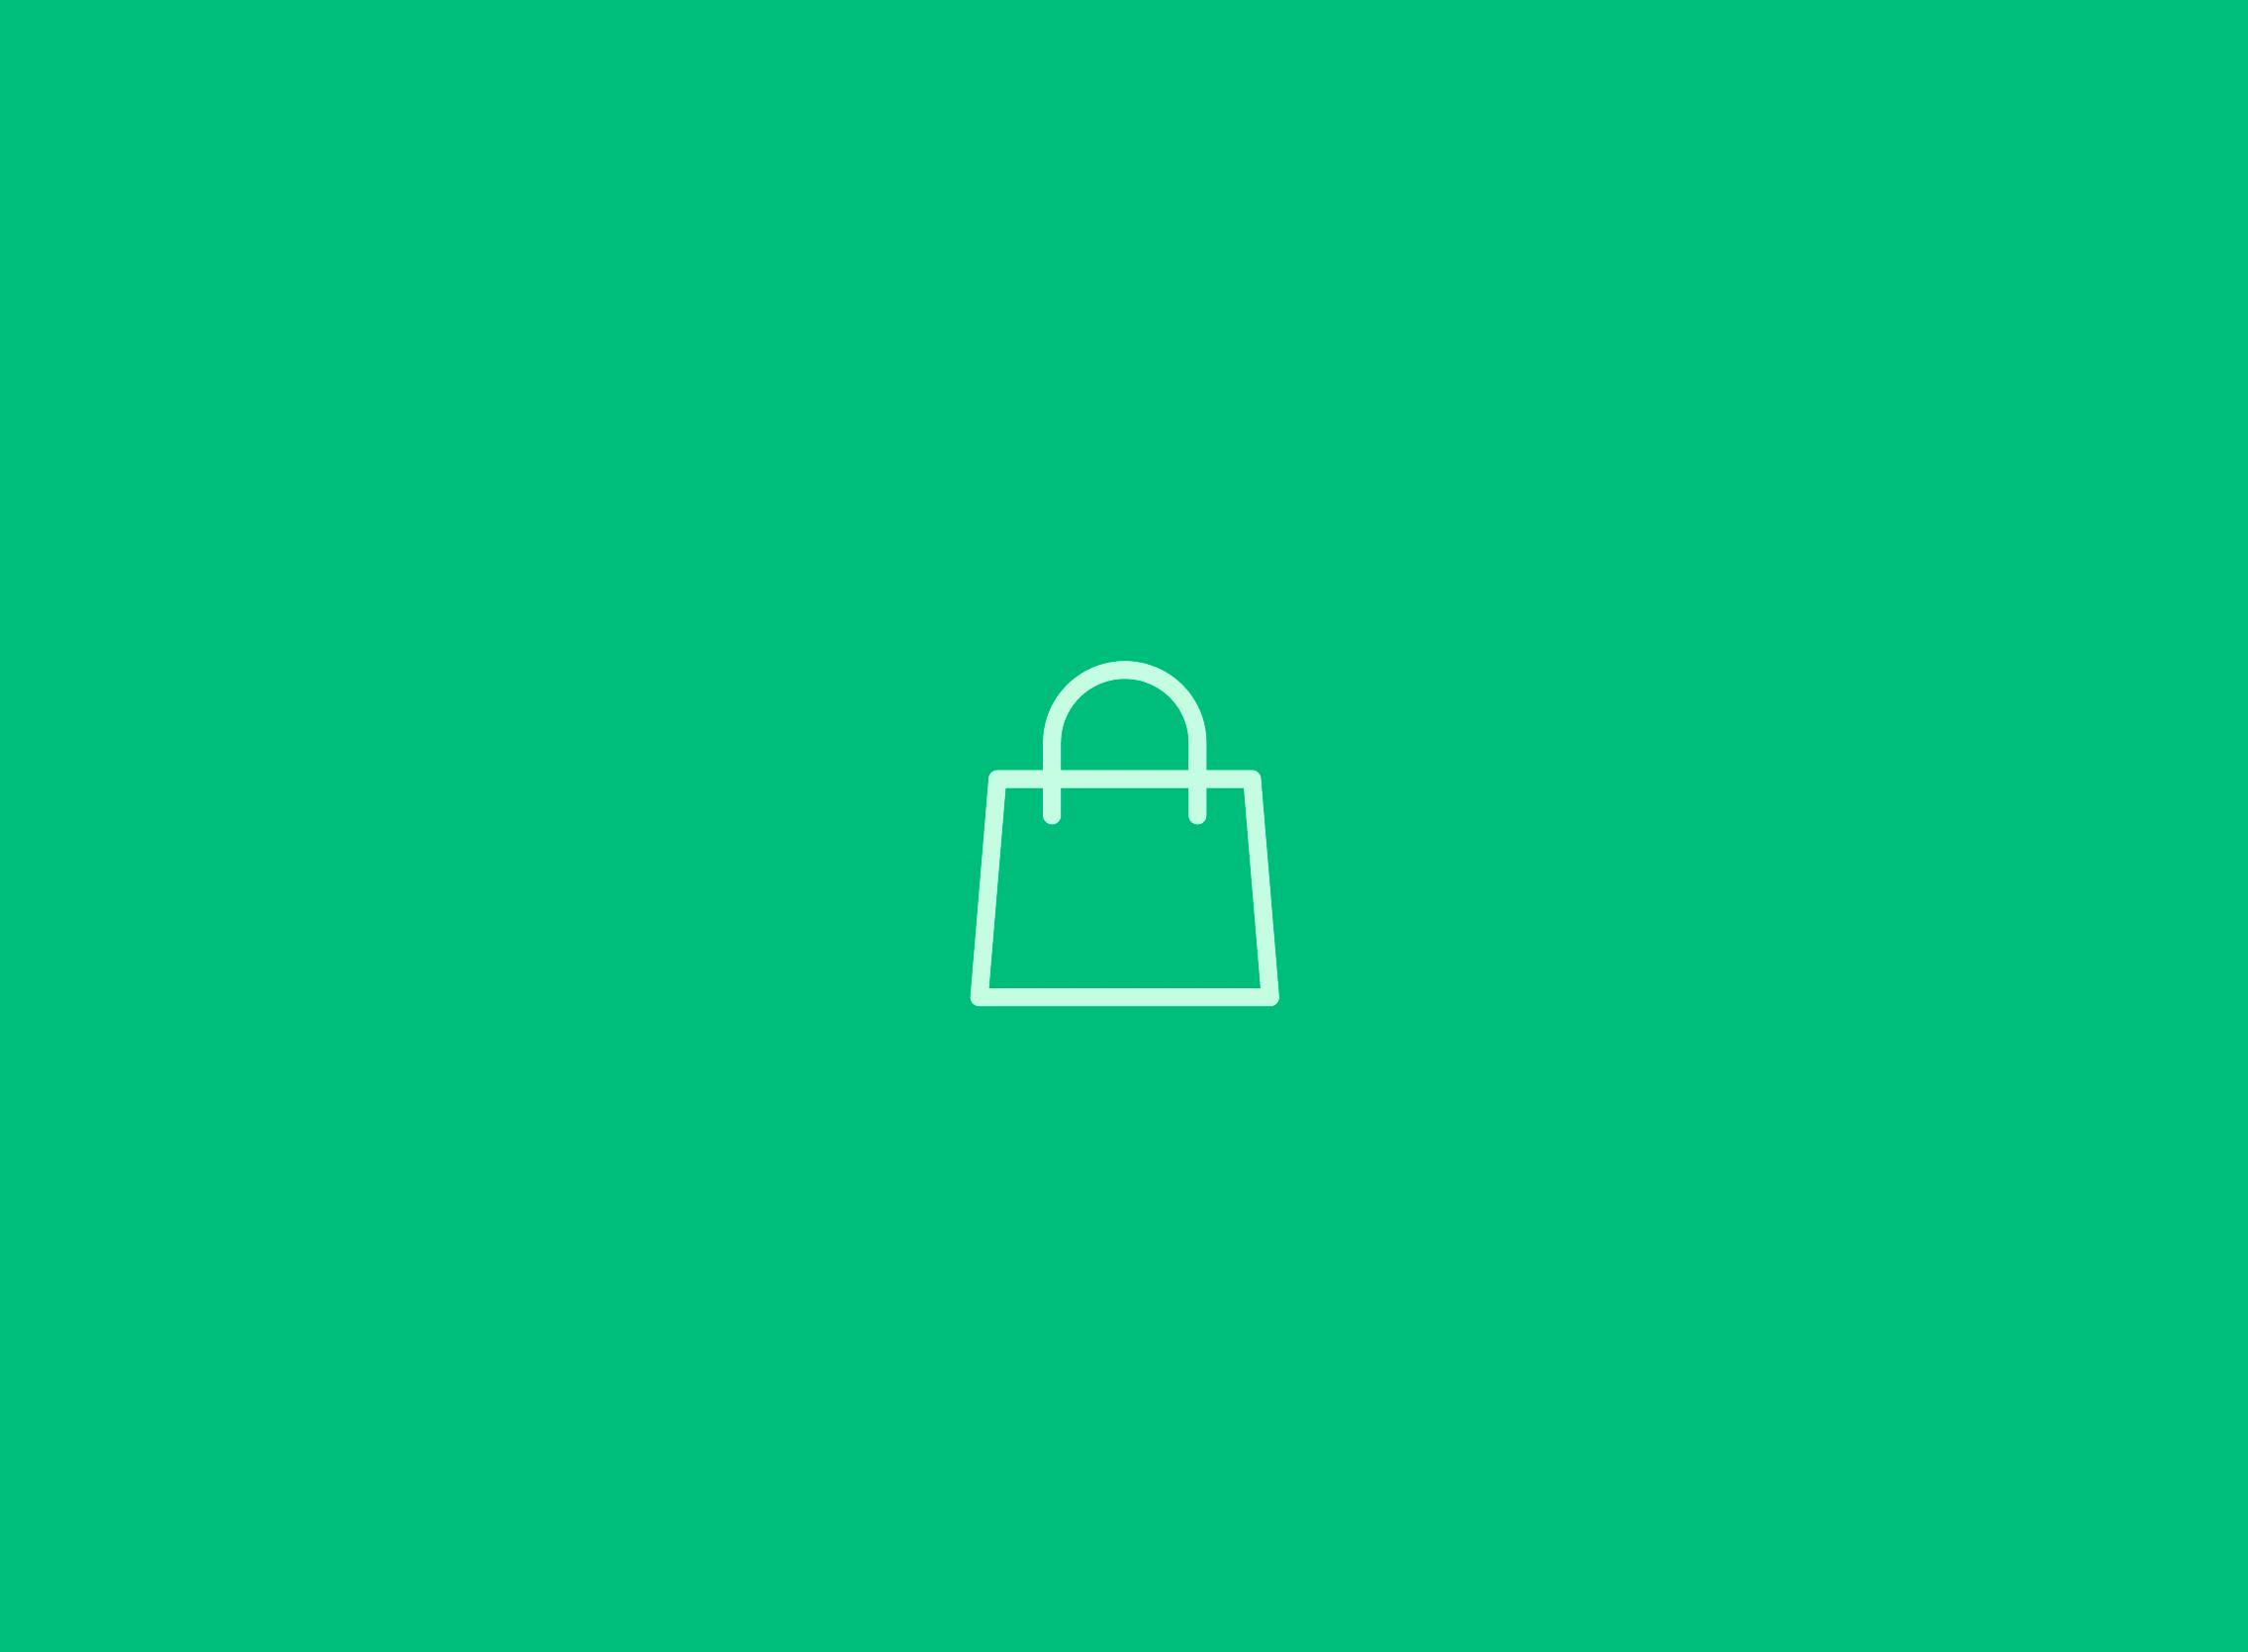 Shopping basket icon – for order tracking from basket to door.